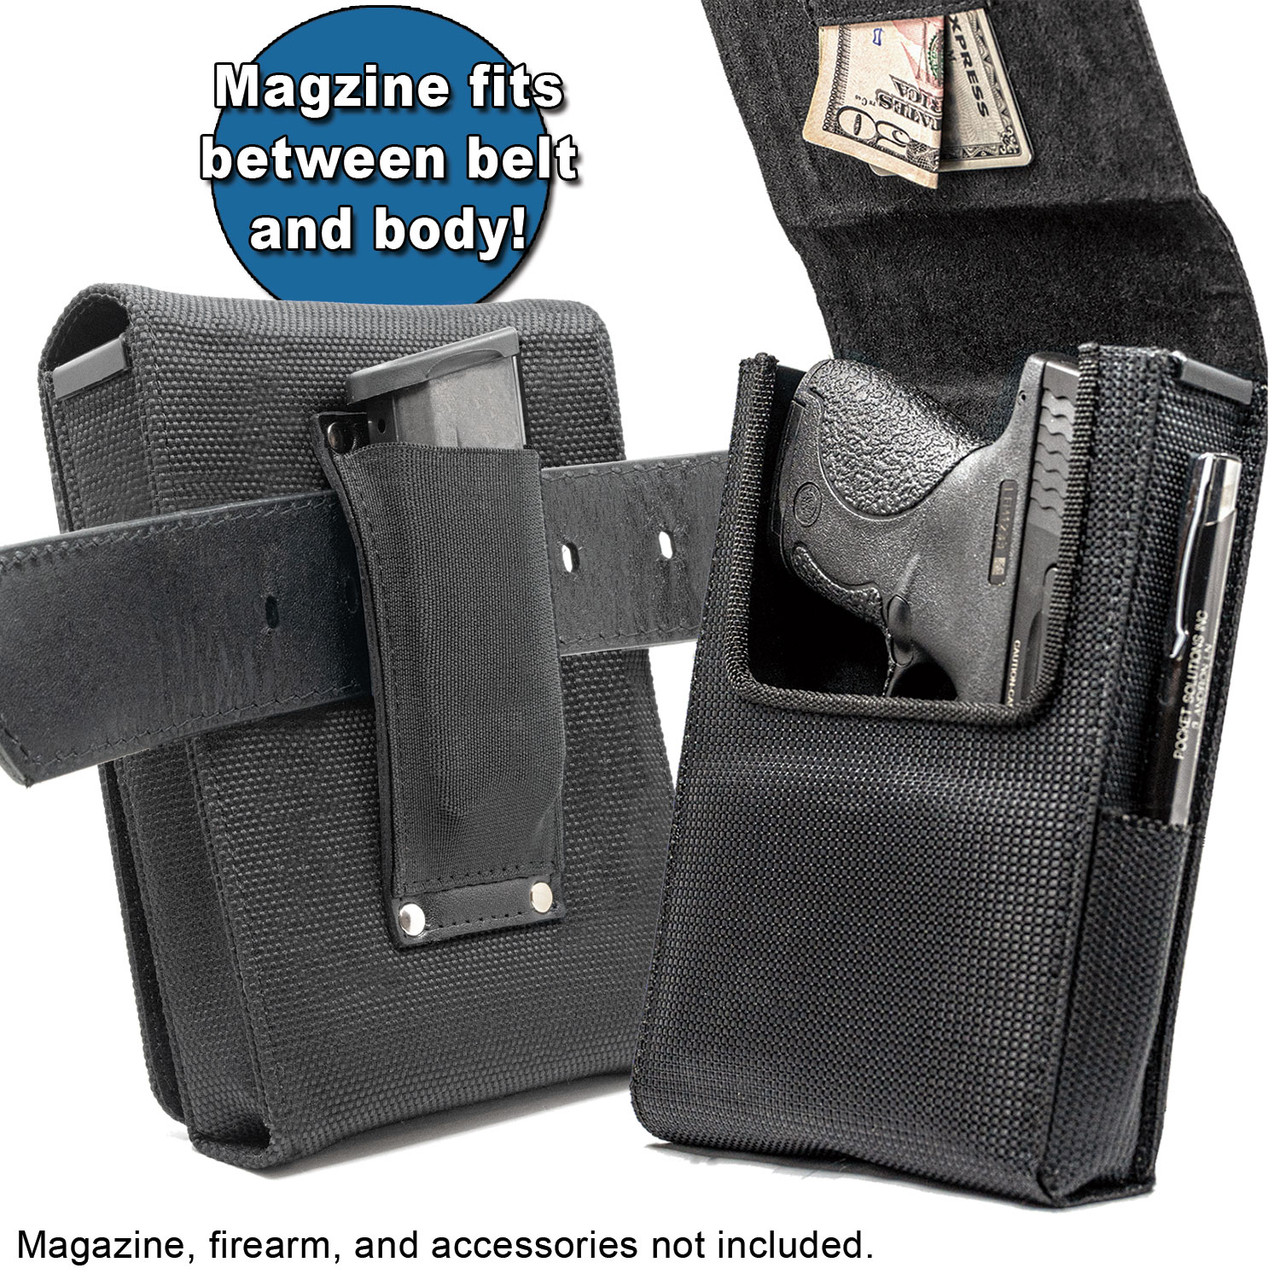 The Springfield 911 (.380) Max Defense Holster